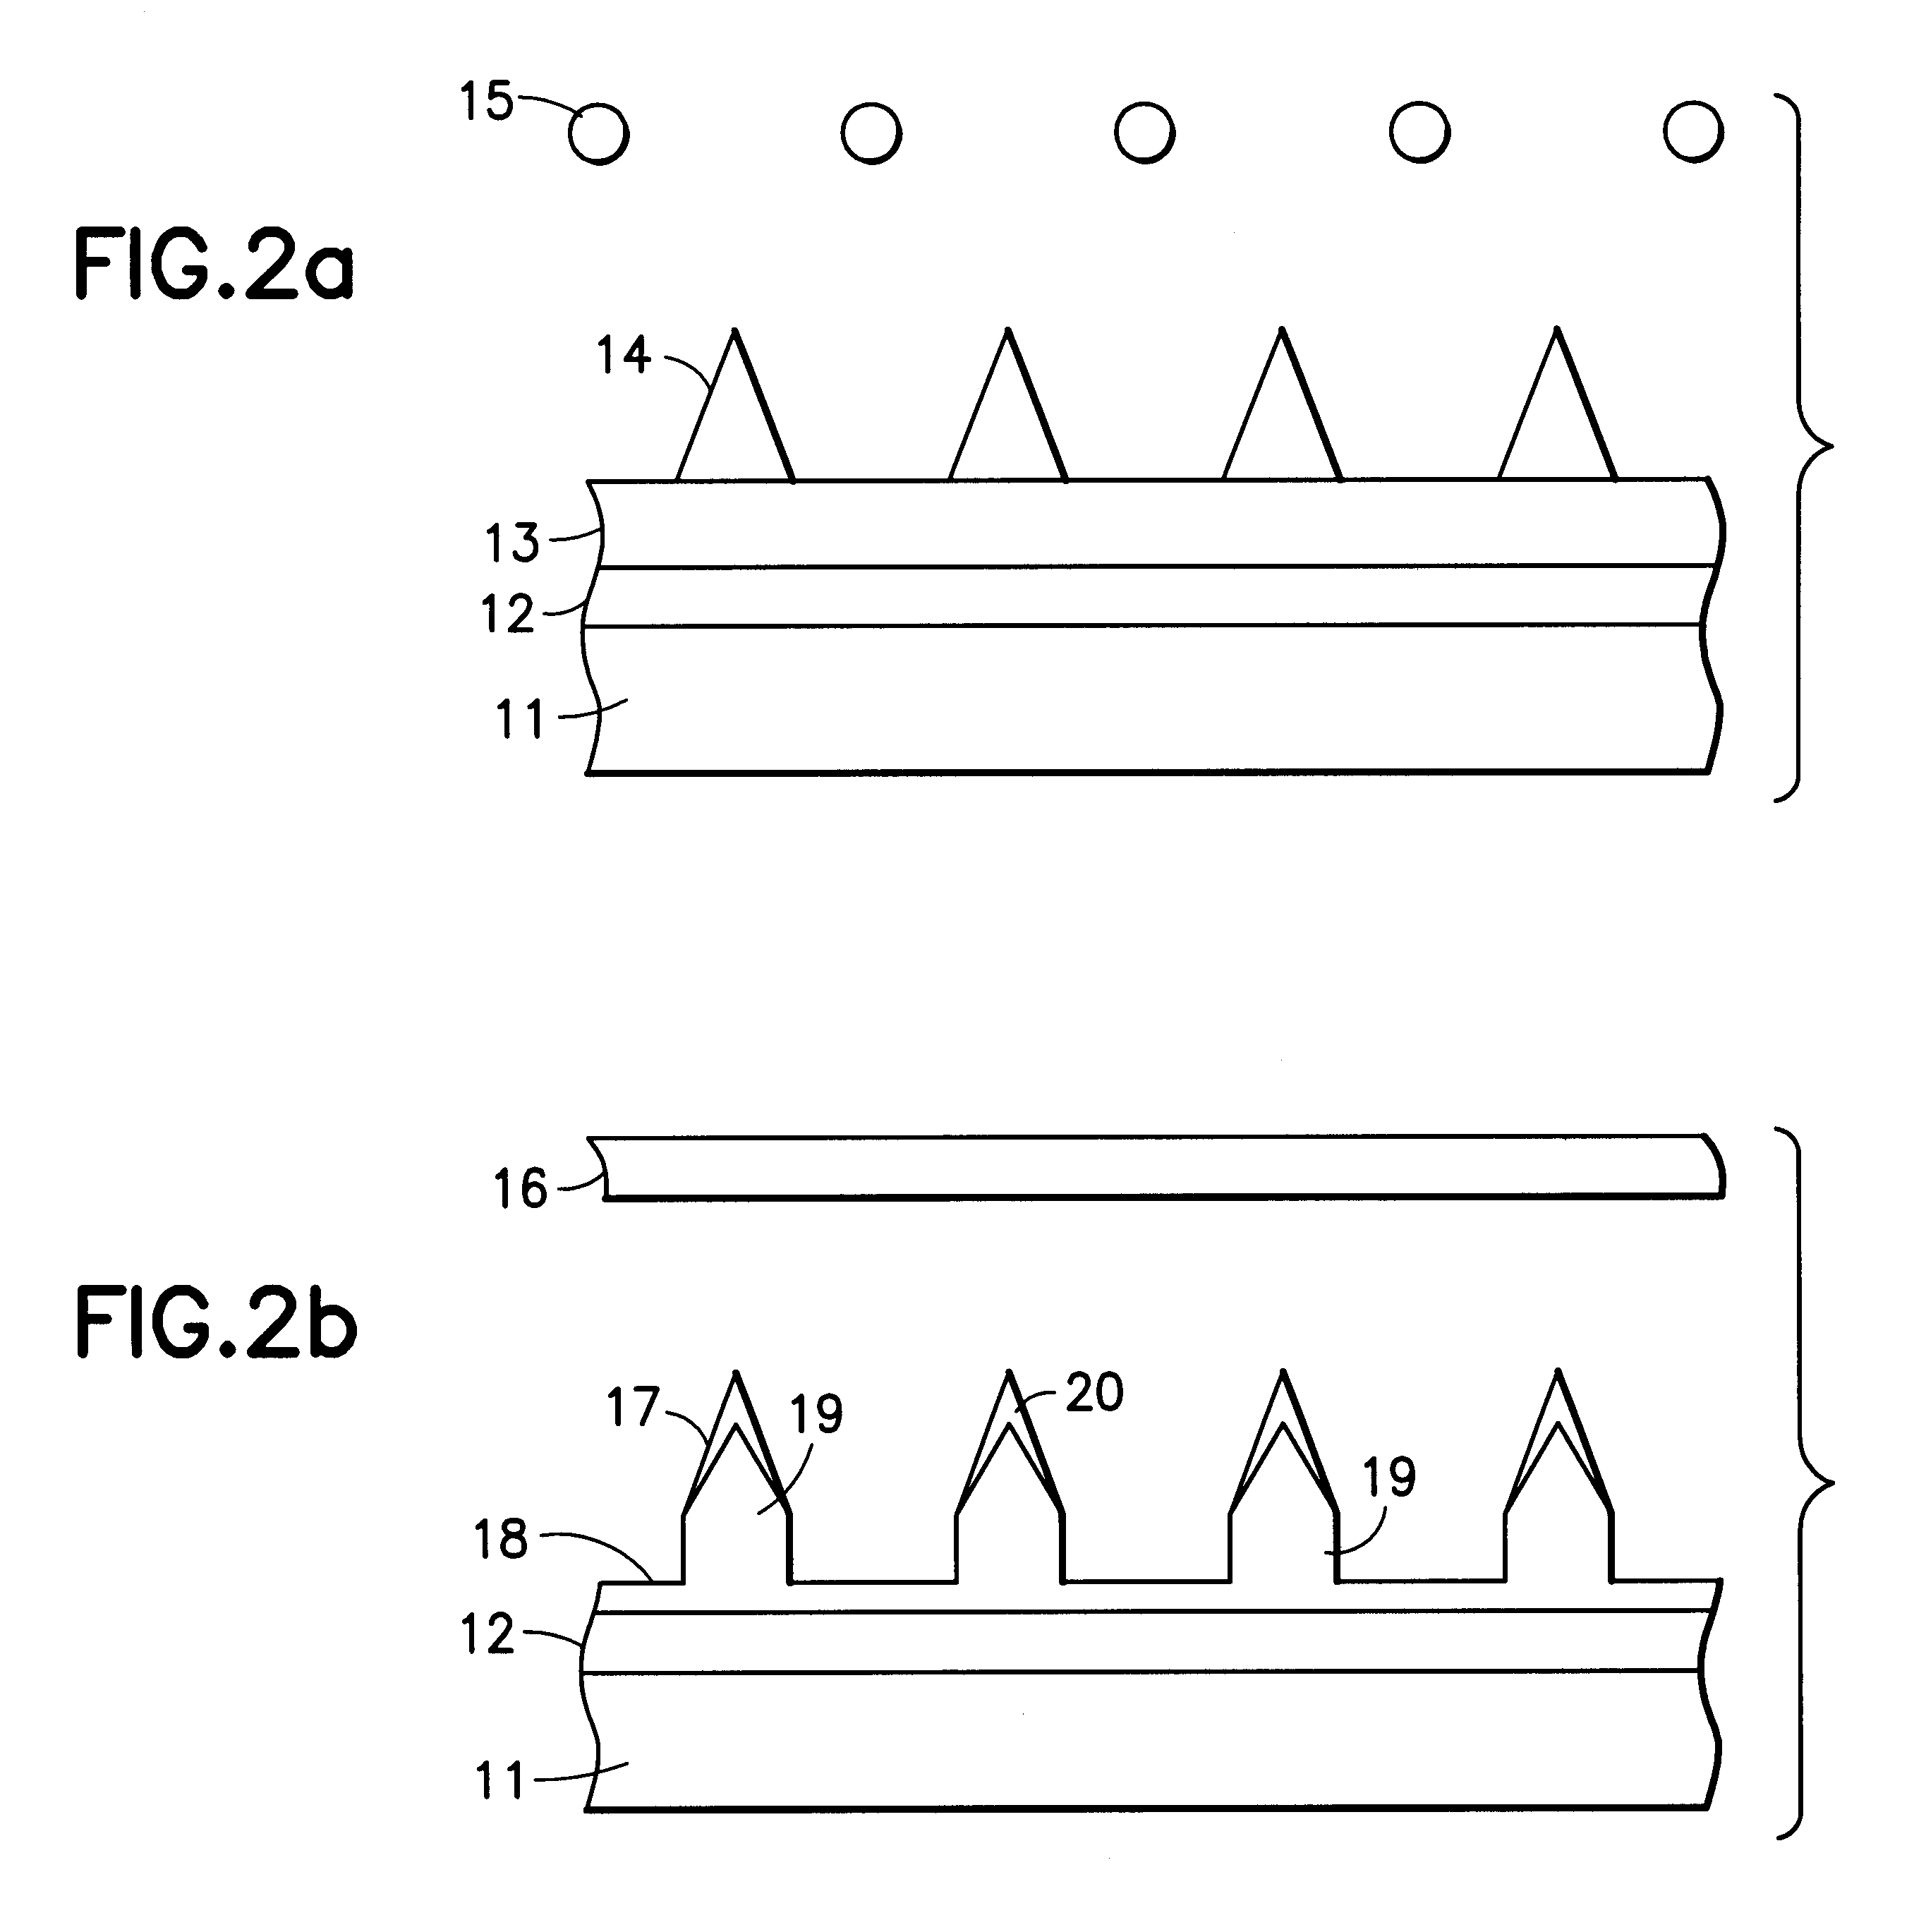 Integrated circuit devices and methods employing amorphous silicon carbide resistor materials